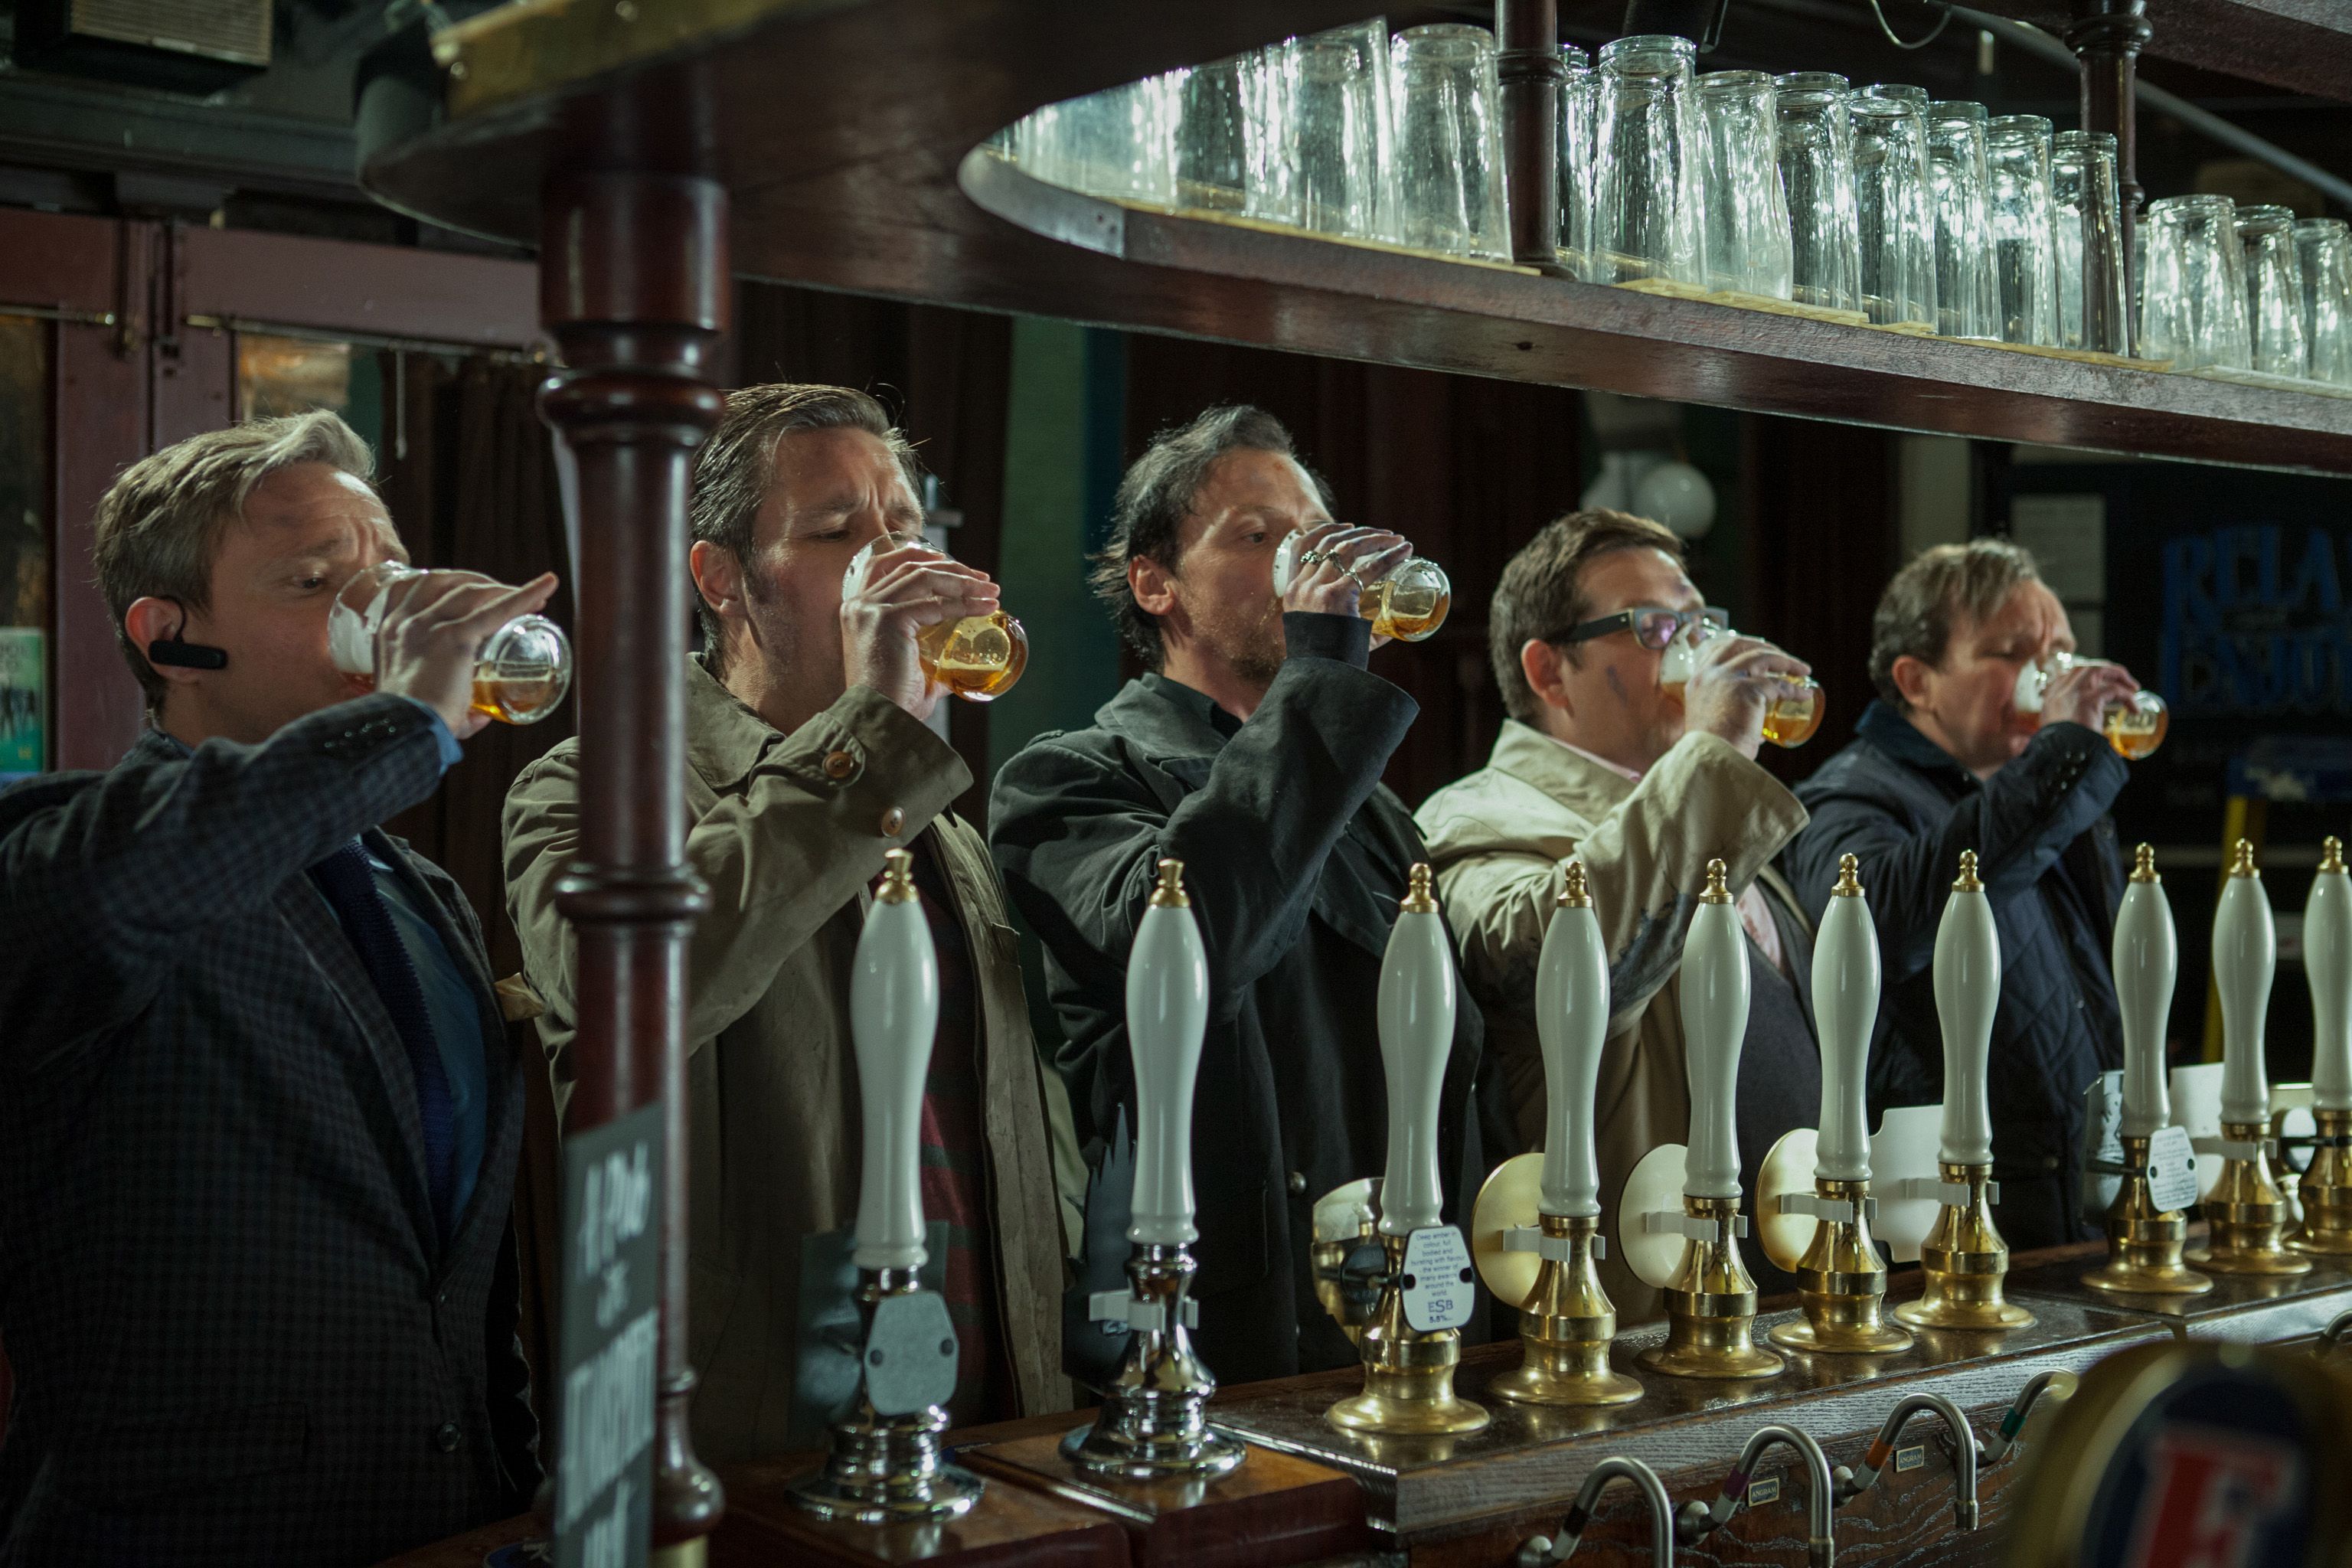 The World's End Photo 1